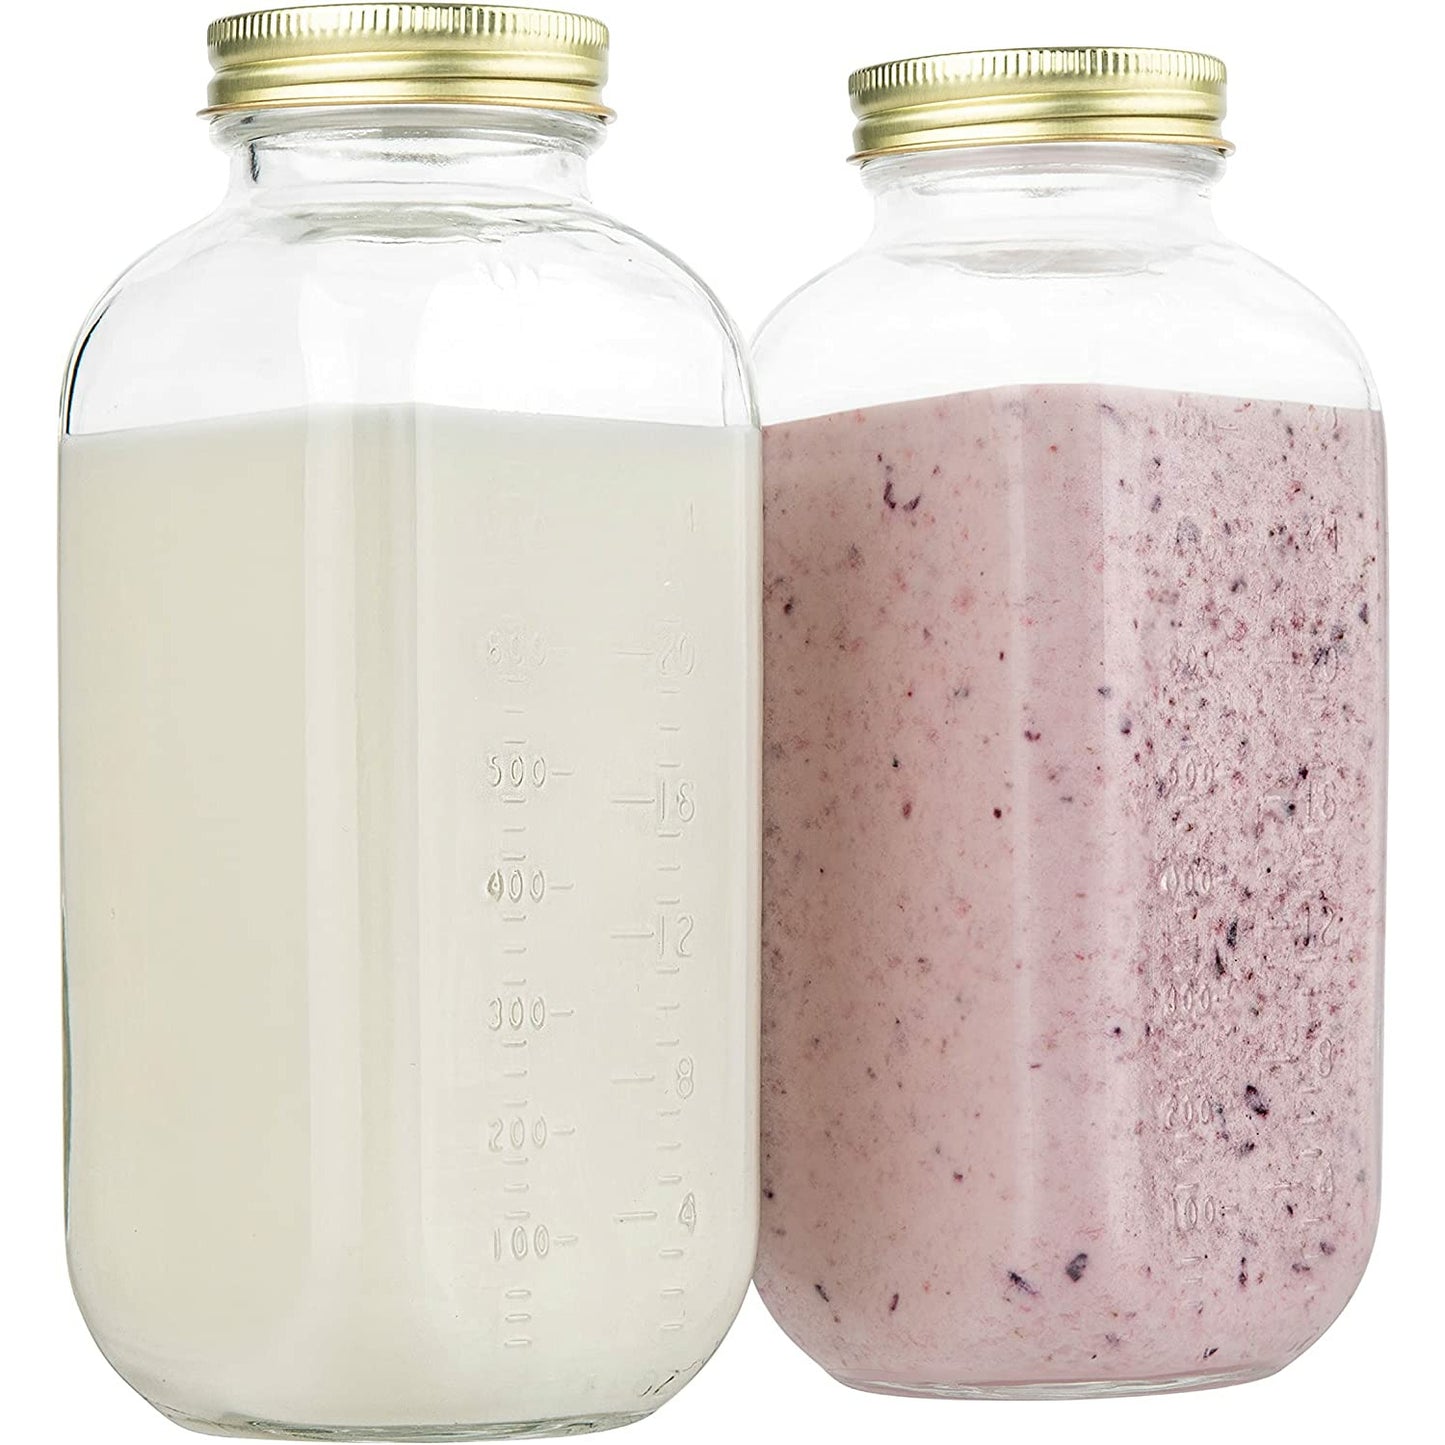 Kitchentoolz 32 Oz Round Glass Milk Jugs With Caps Perfect Milk Container  for Refrigerator with Tamper Proof Lid and Pour Spout 